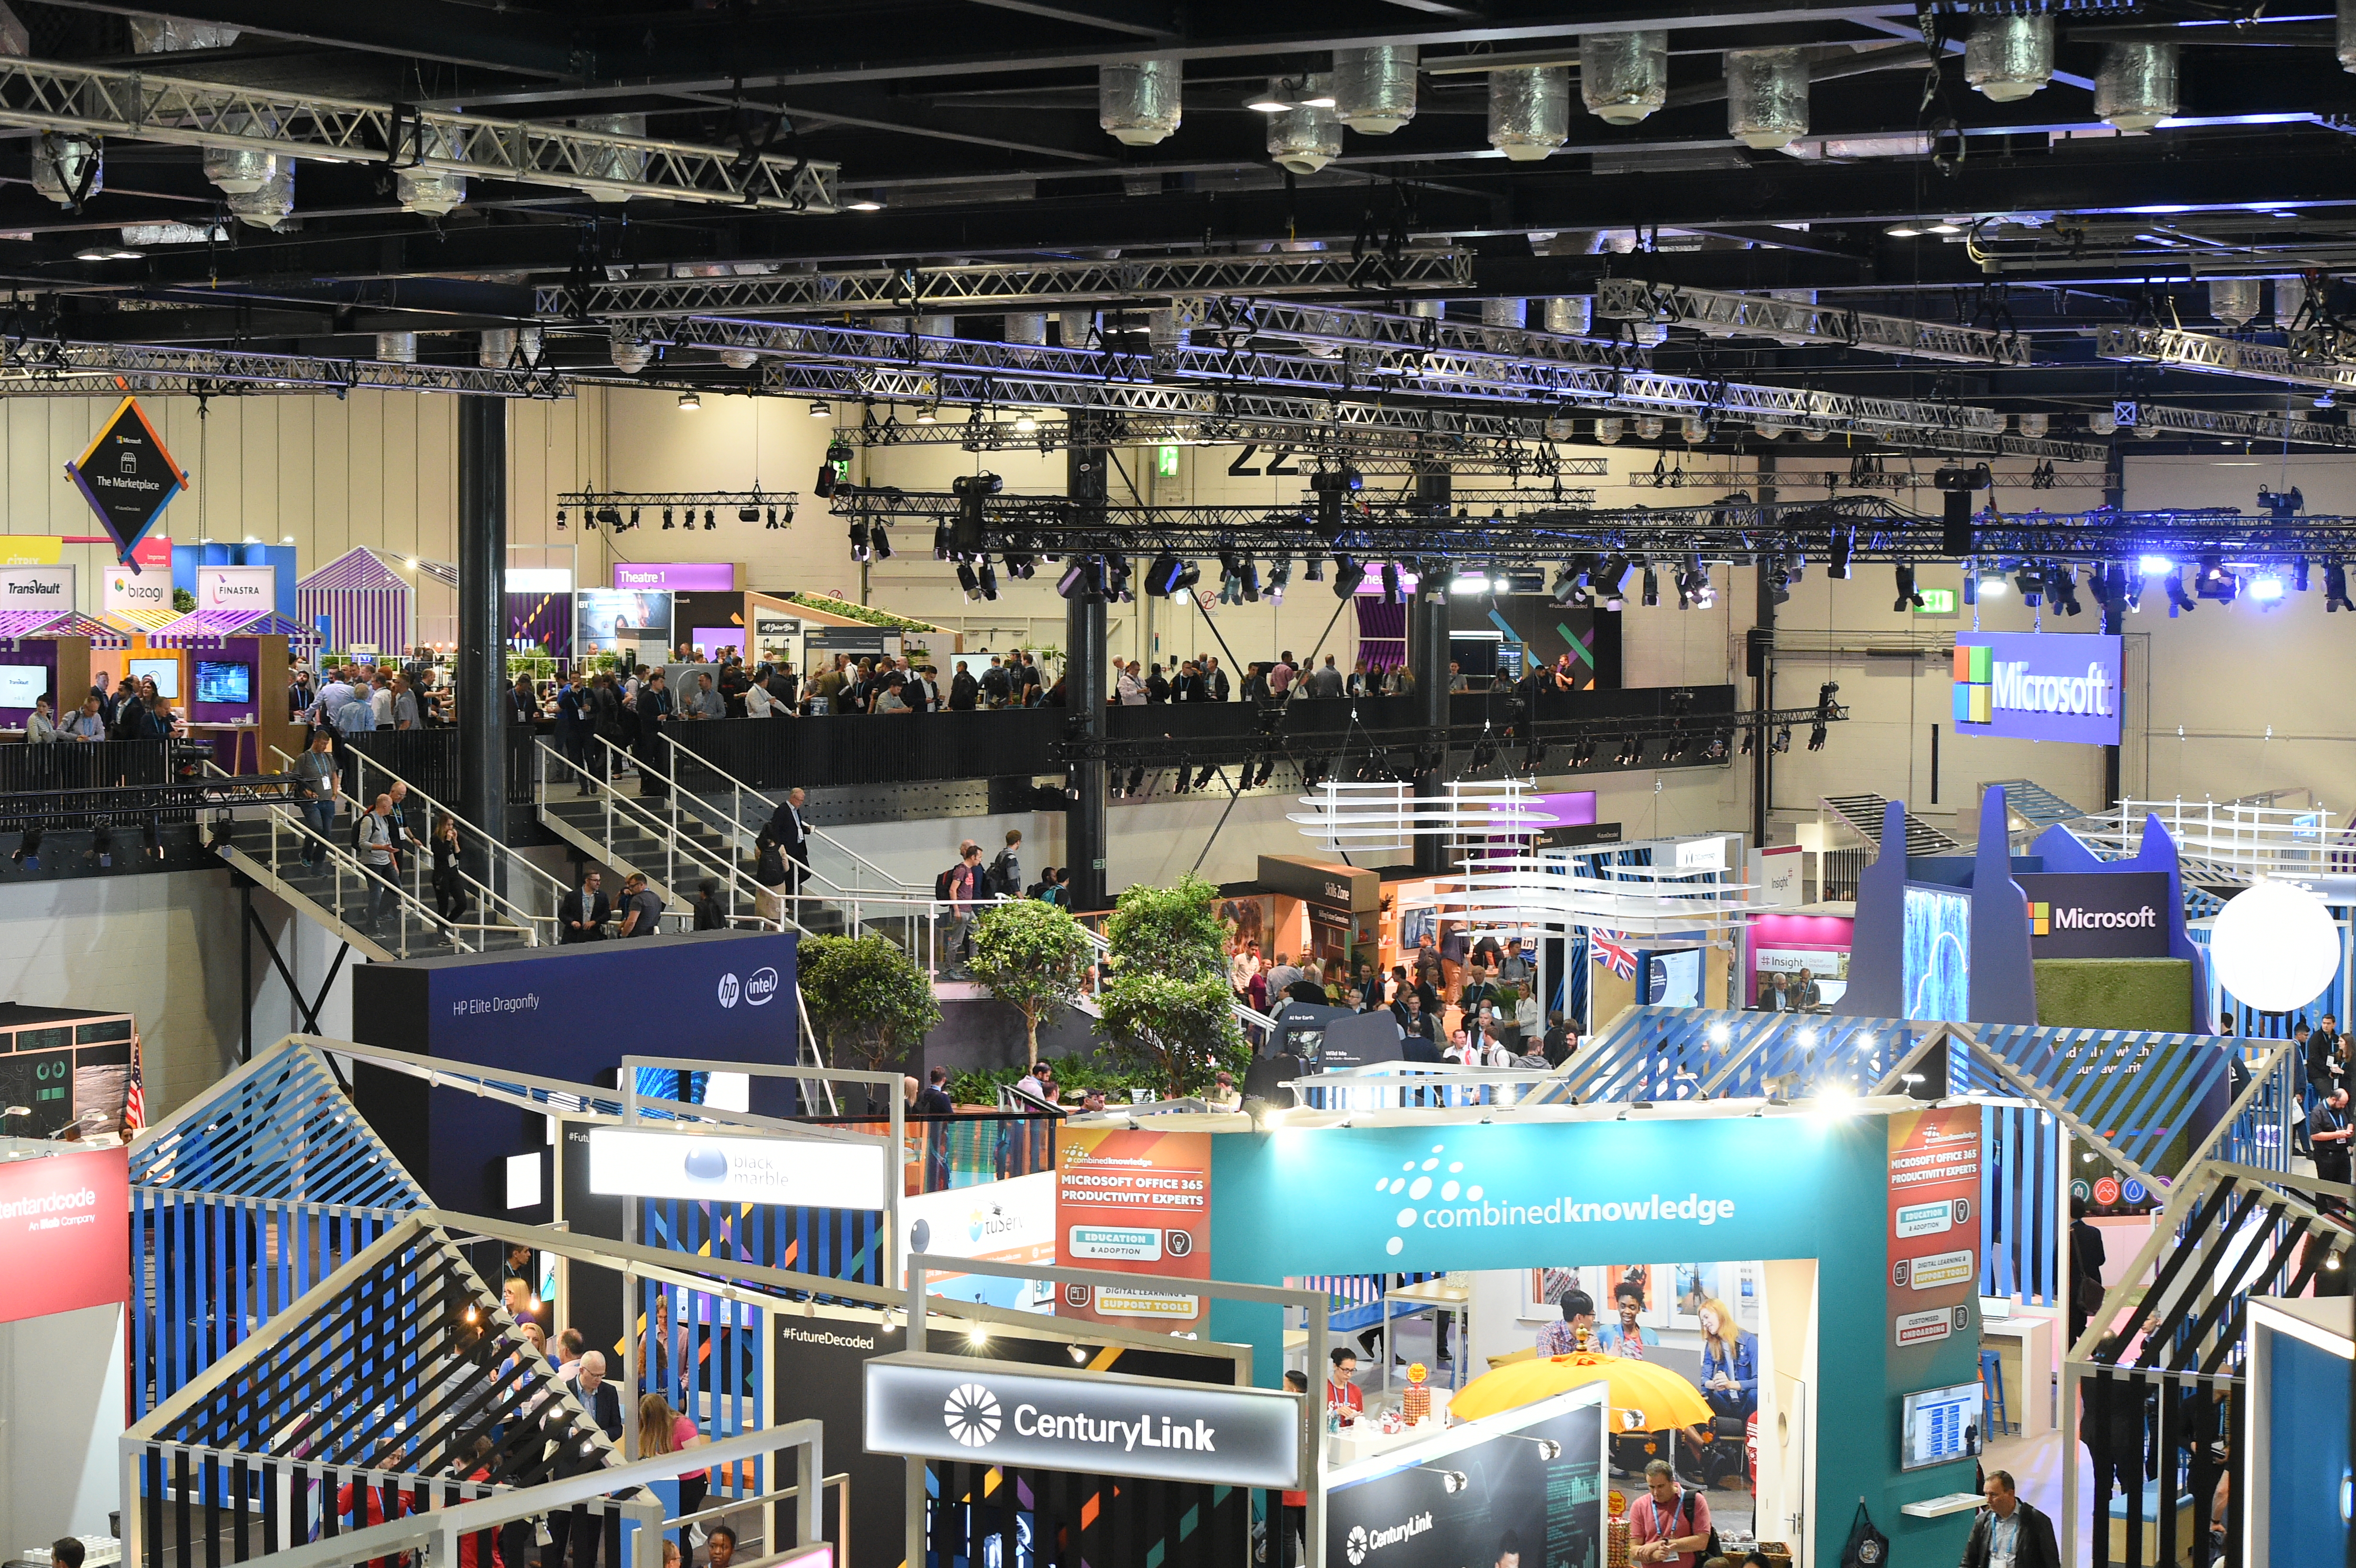 The expo floor at Future Decoded